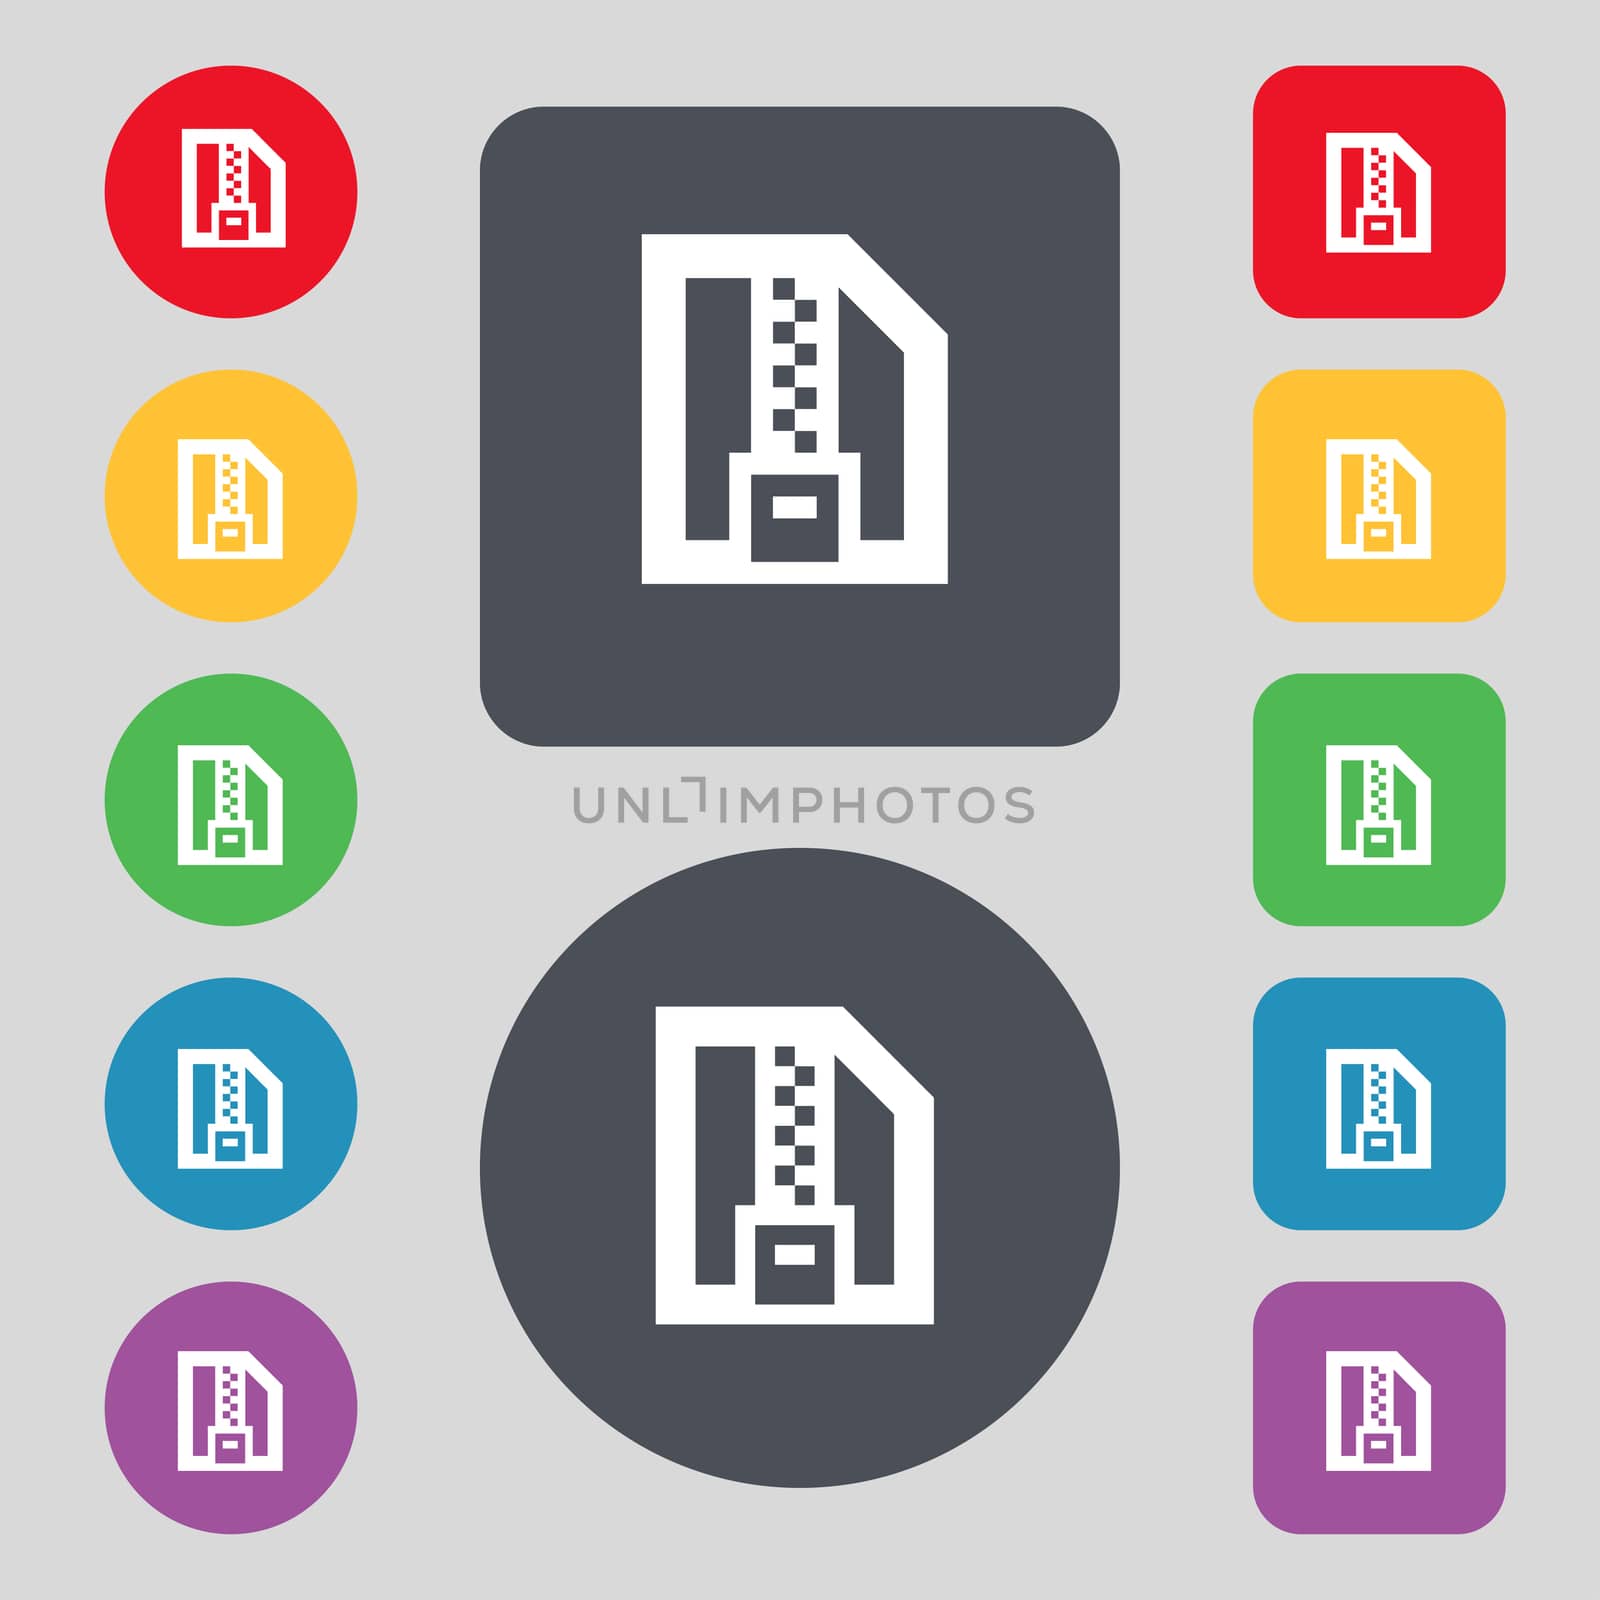 Archive file, Download compressed, ZIP zipped icon sign. A set of 12 colored buttons. Flat design. illustration